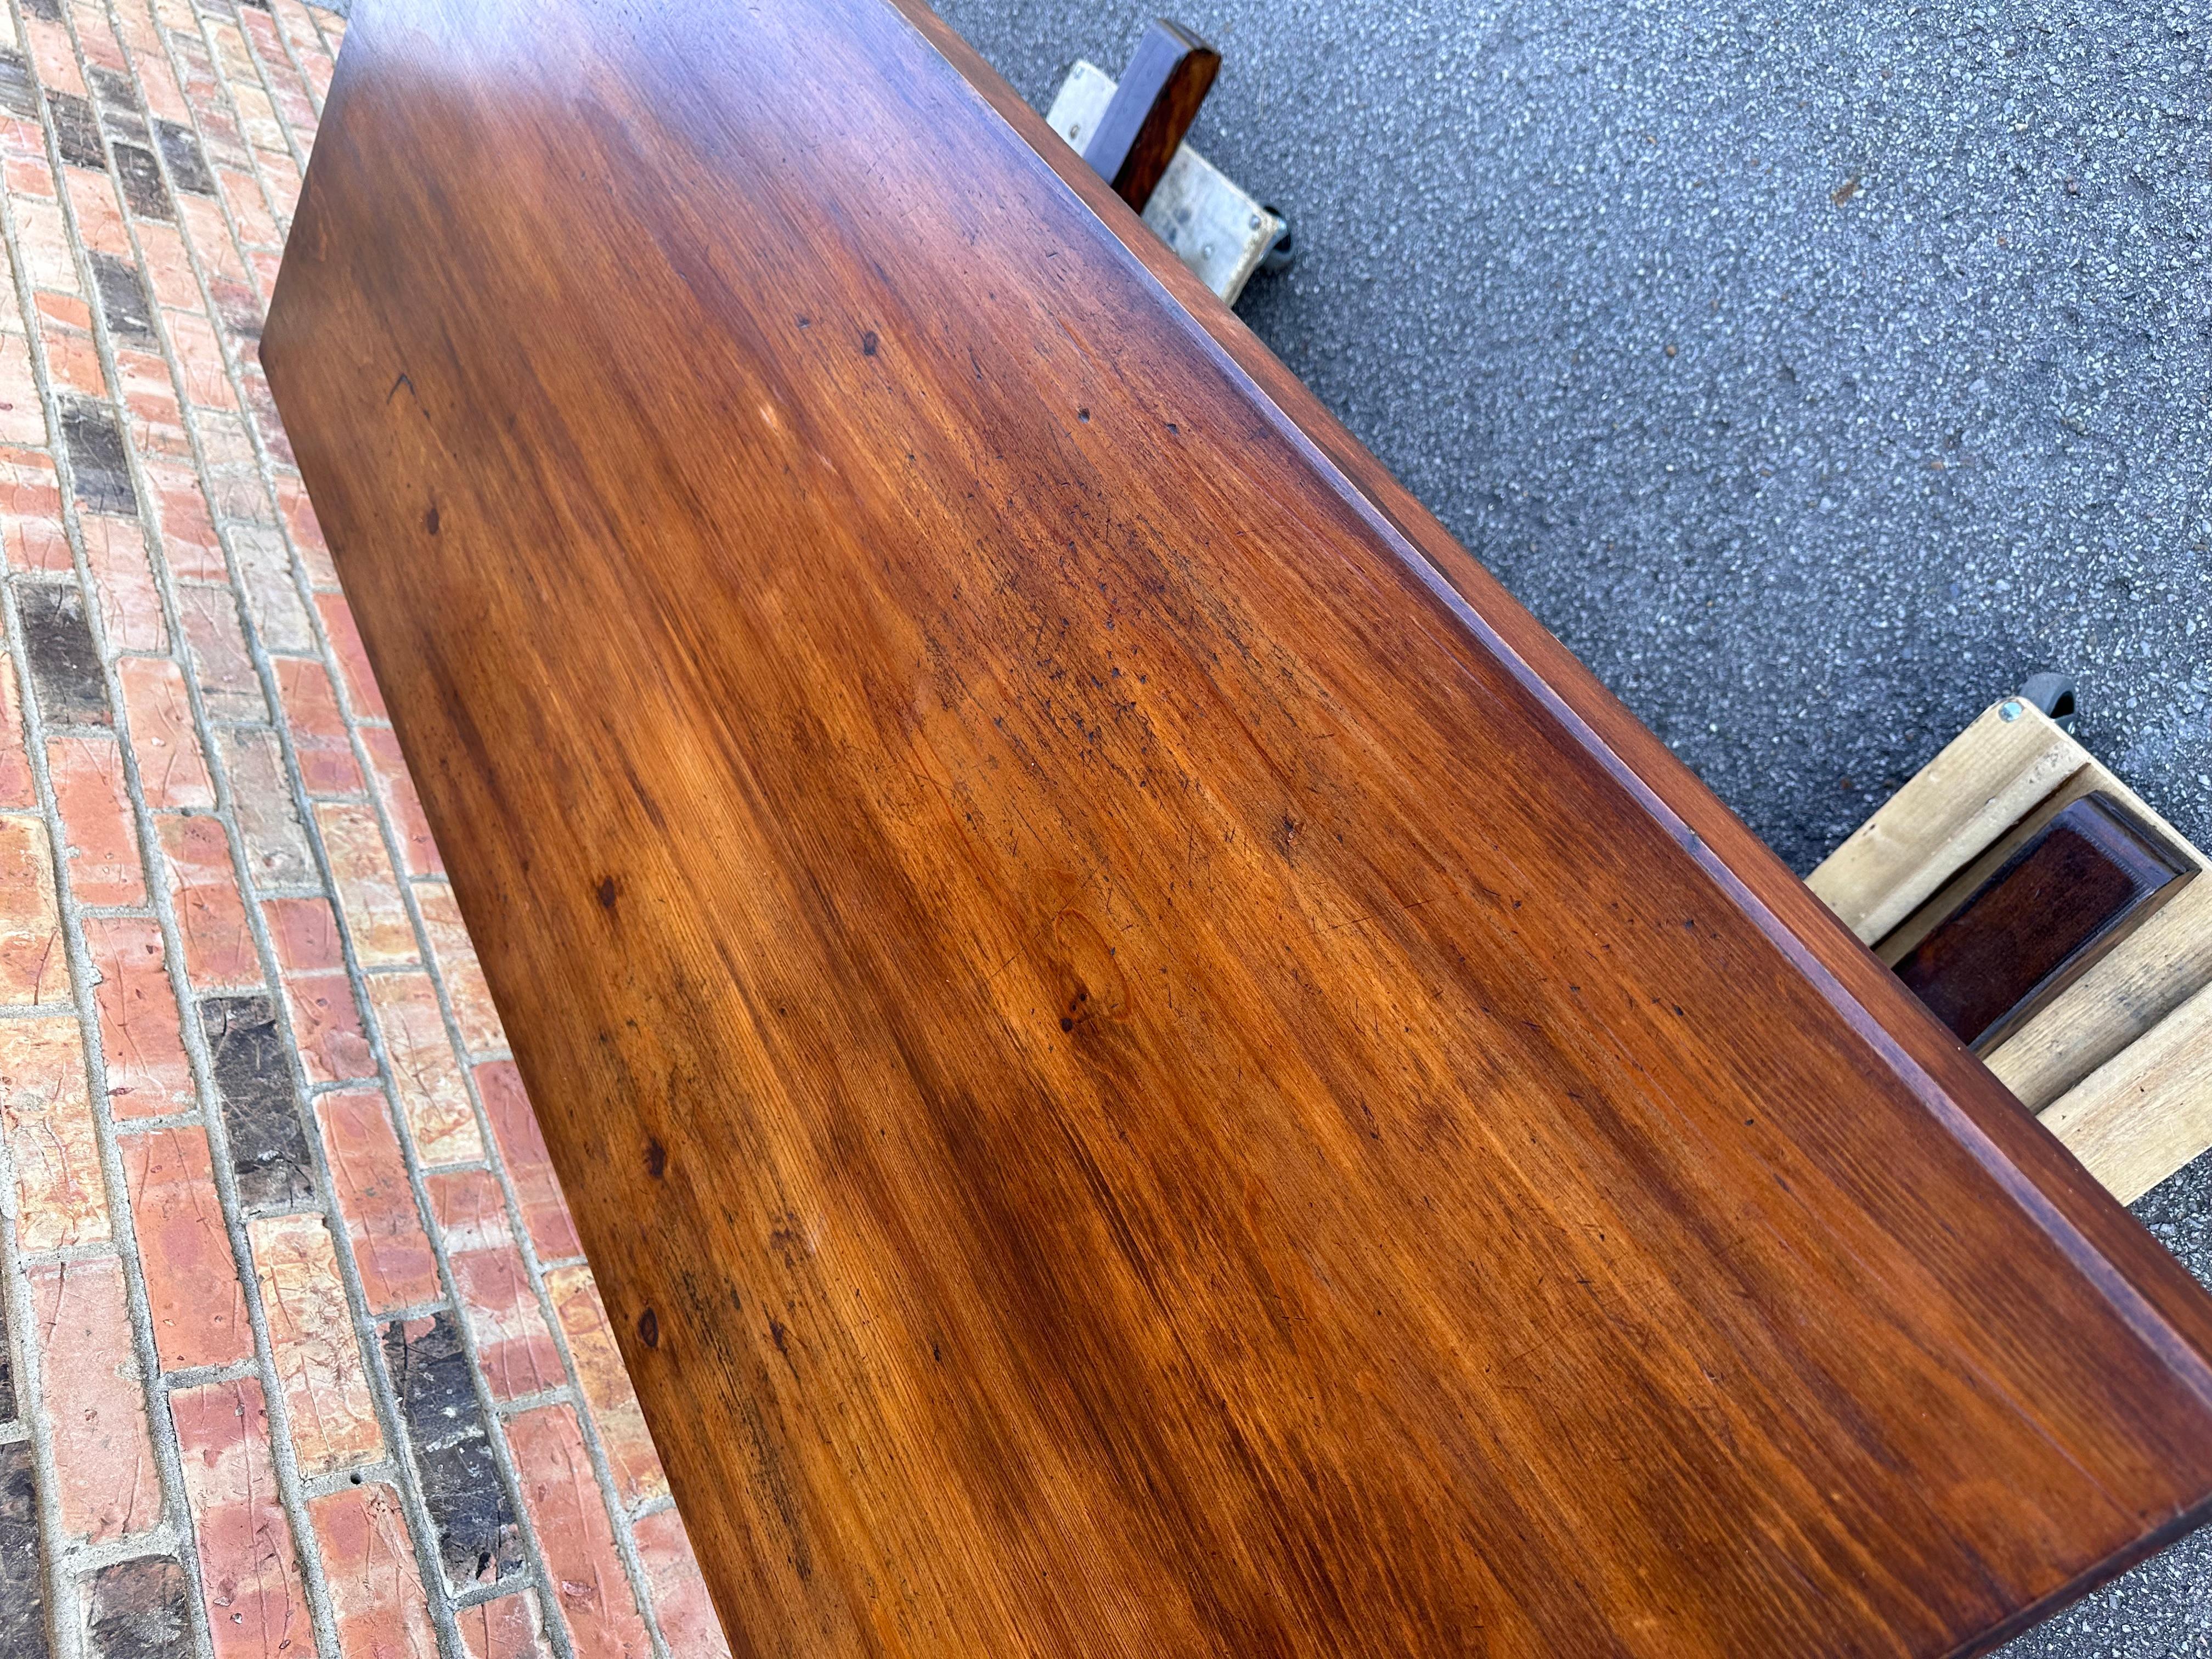 This is a stunning French farm table! Simple clean lines and a smooth top that radiate a homey elegance. The patina on this piece is beautiful, and shows up the detail in the wood especially well. This would be a wonderful addition to a dining room